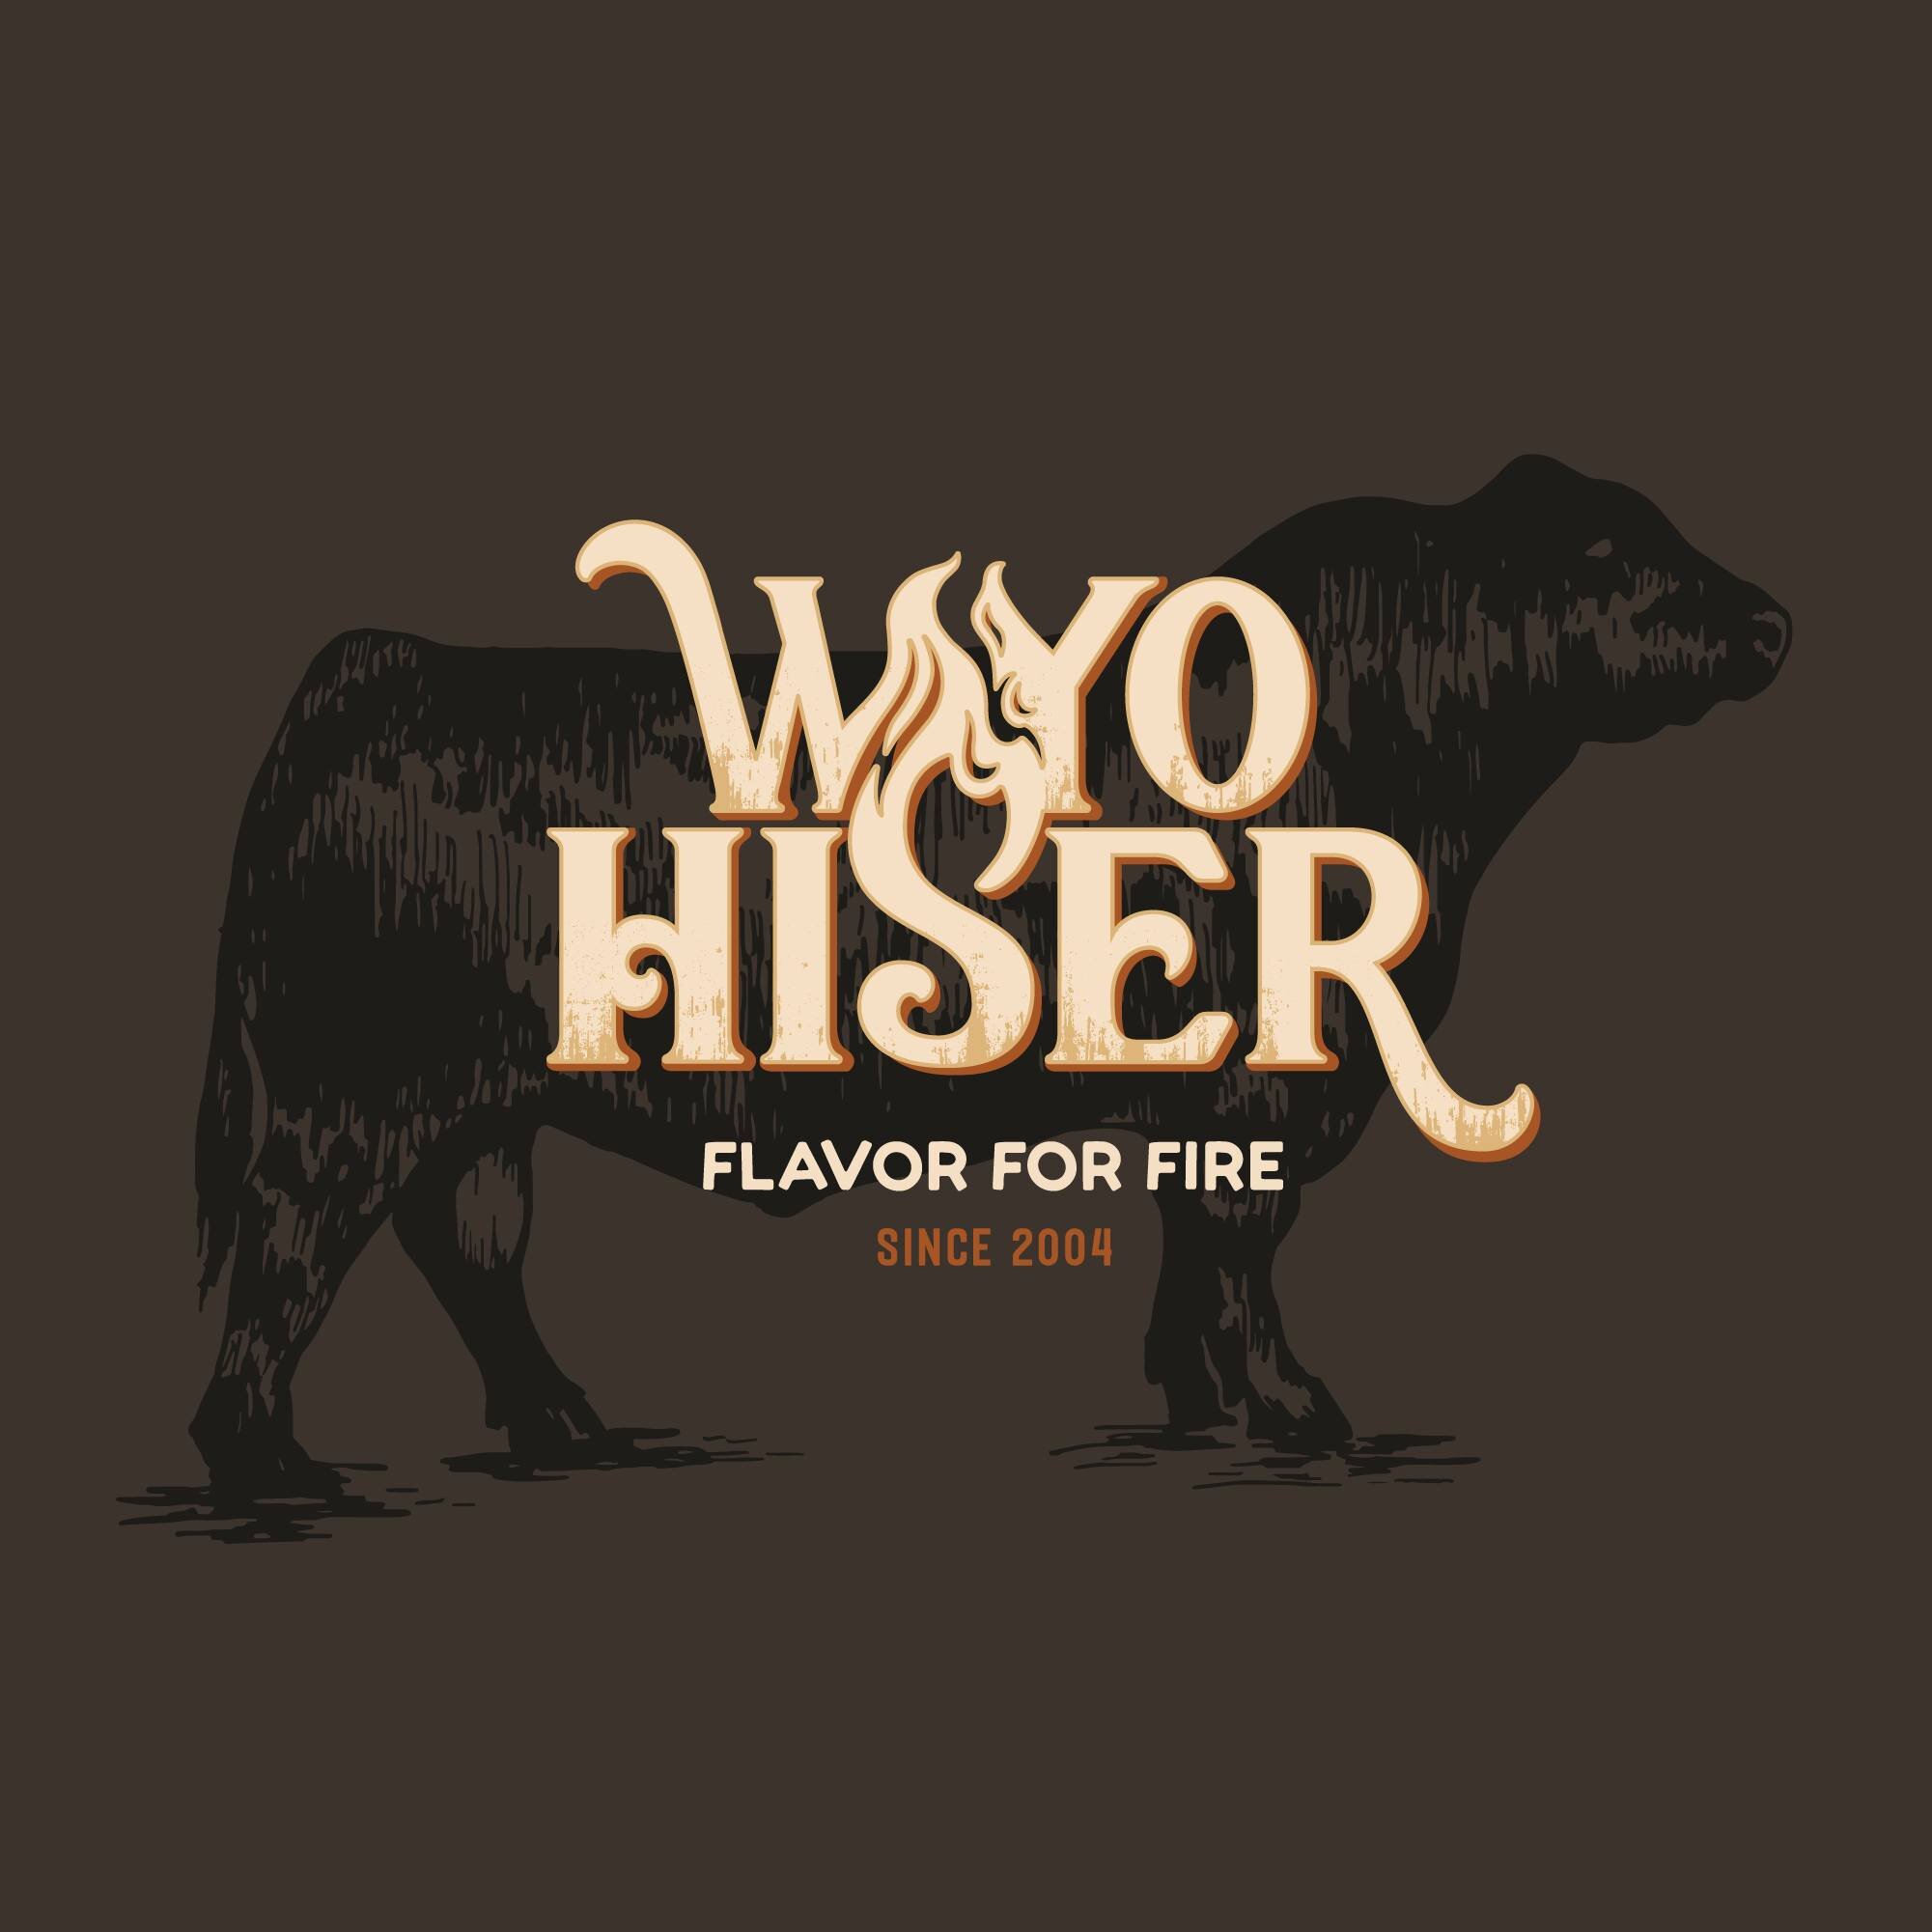 I've been working on several different branding pieces with @wyohiser these past few months, and I'm excited to showcase Tom and Brandi's updated logo, complete with a hand-drawn angus bull illustration and customized text elements 🔥🥩🧄🍴.

If you'